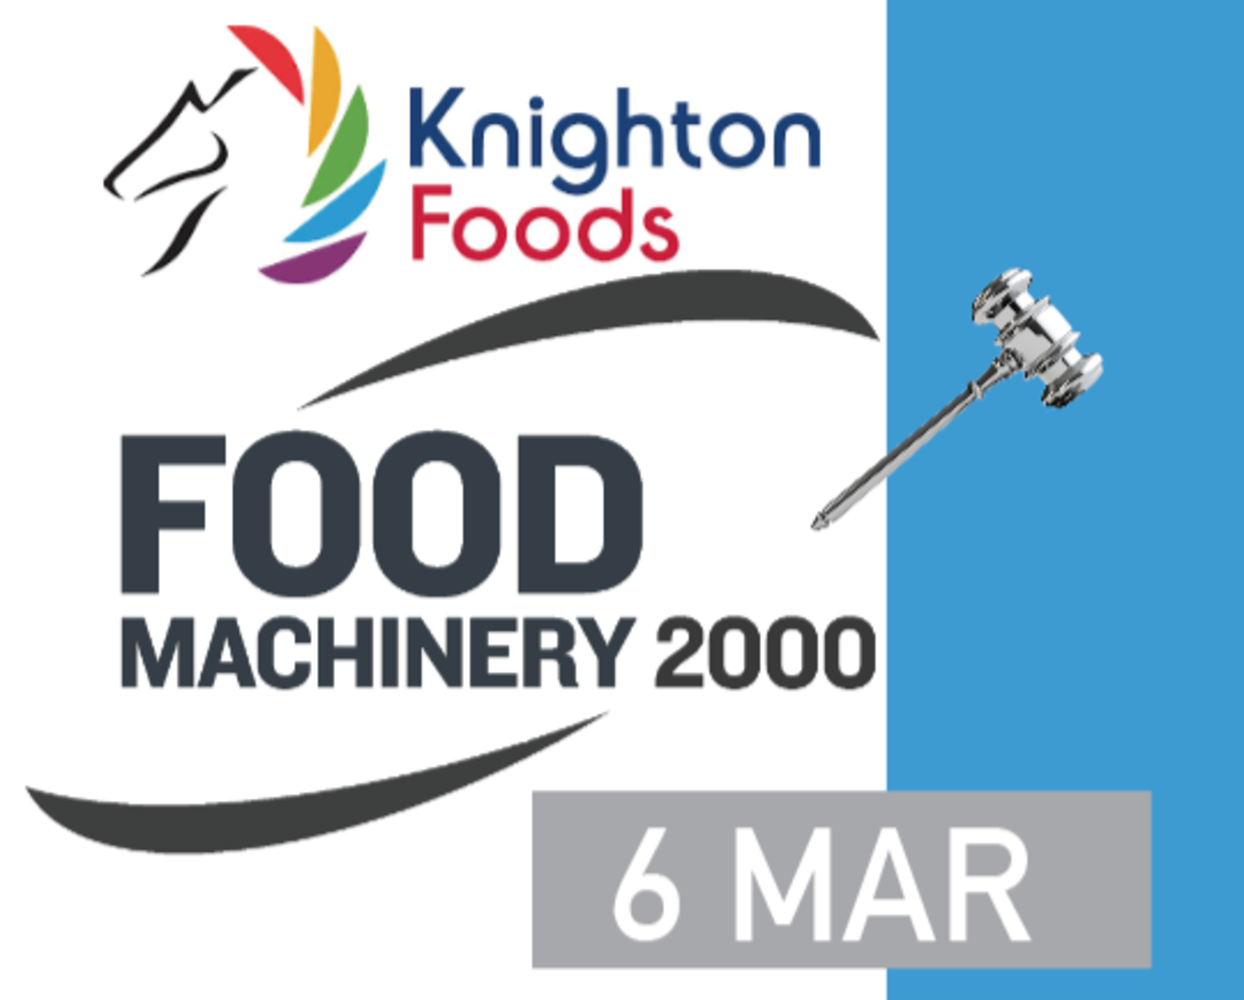 DUE TO THE CLOSURE OF KNIGHTON FOODS - OVER 600 LOTS